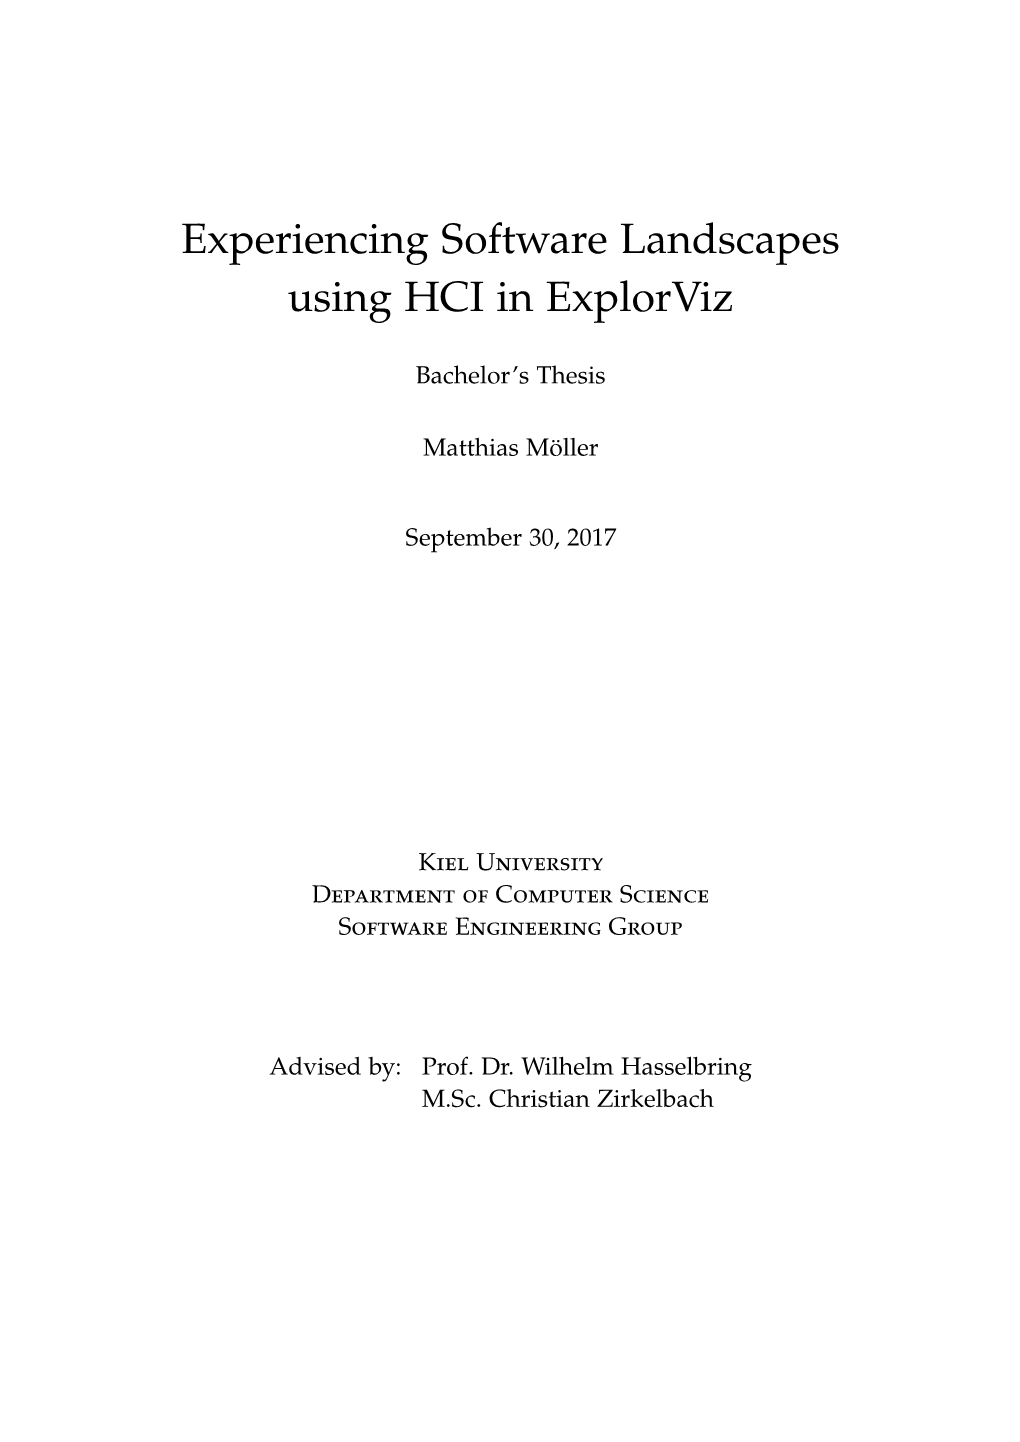 Experiencing Software Landscapes Using HCI in Explorviz